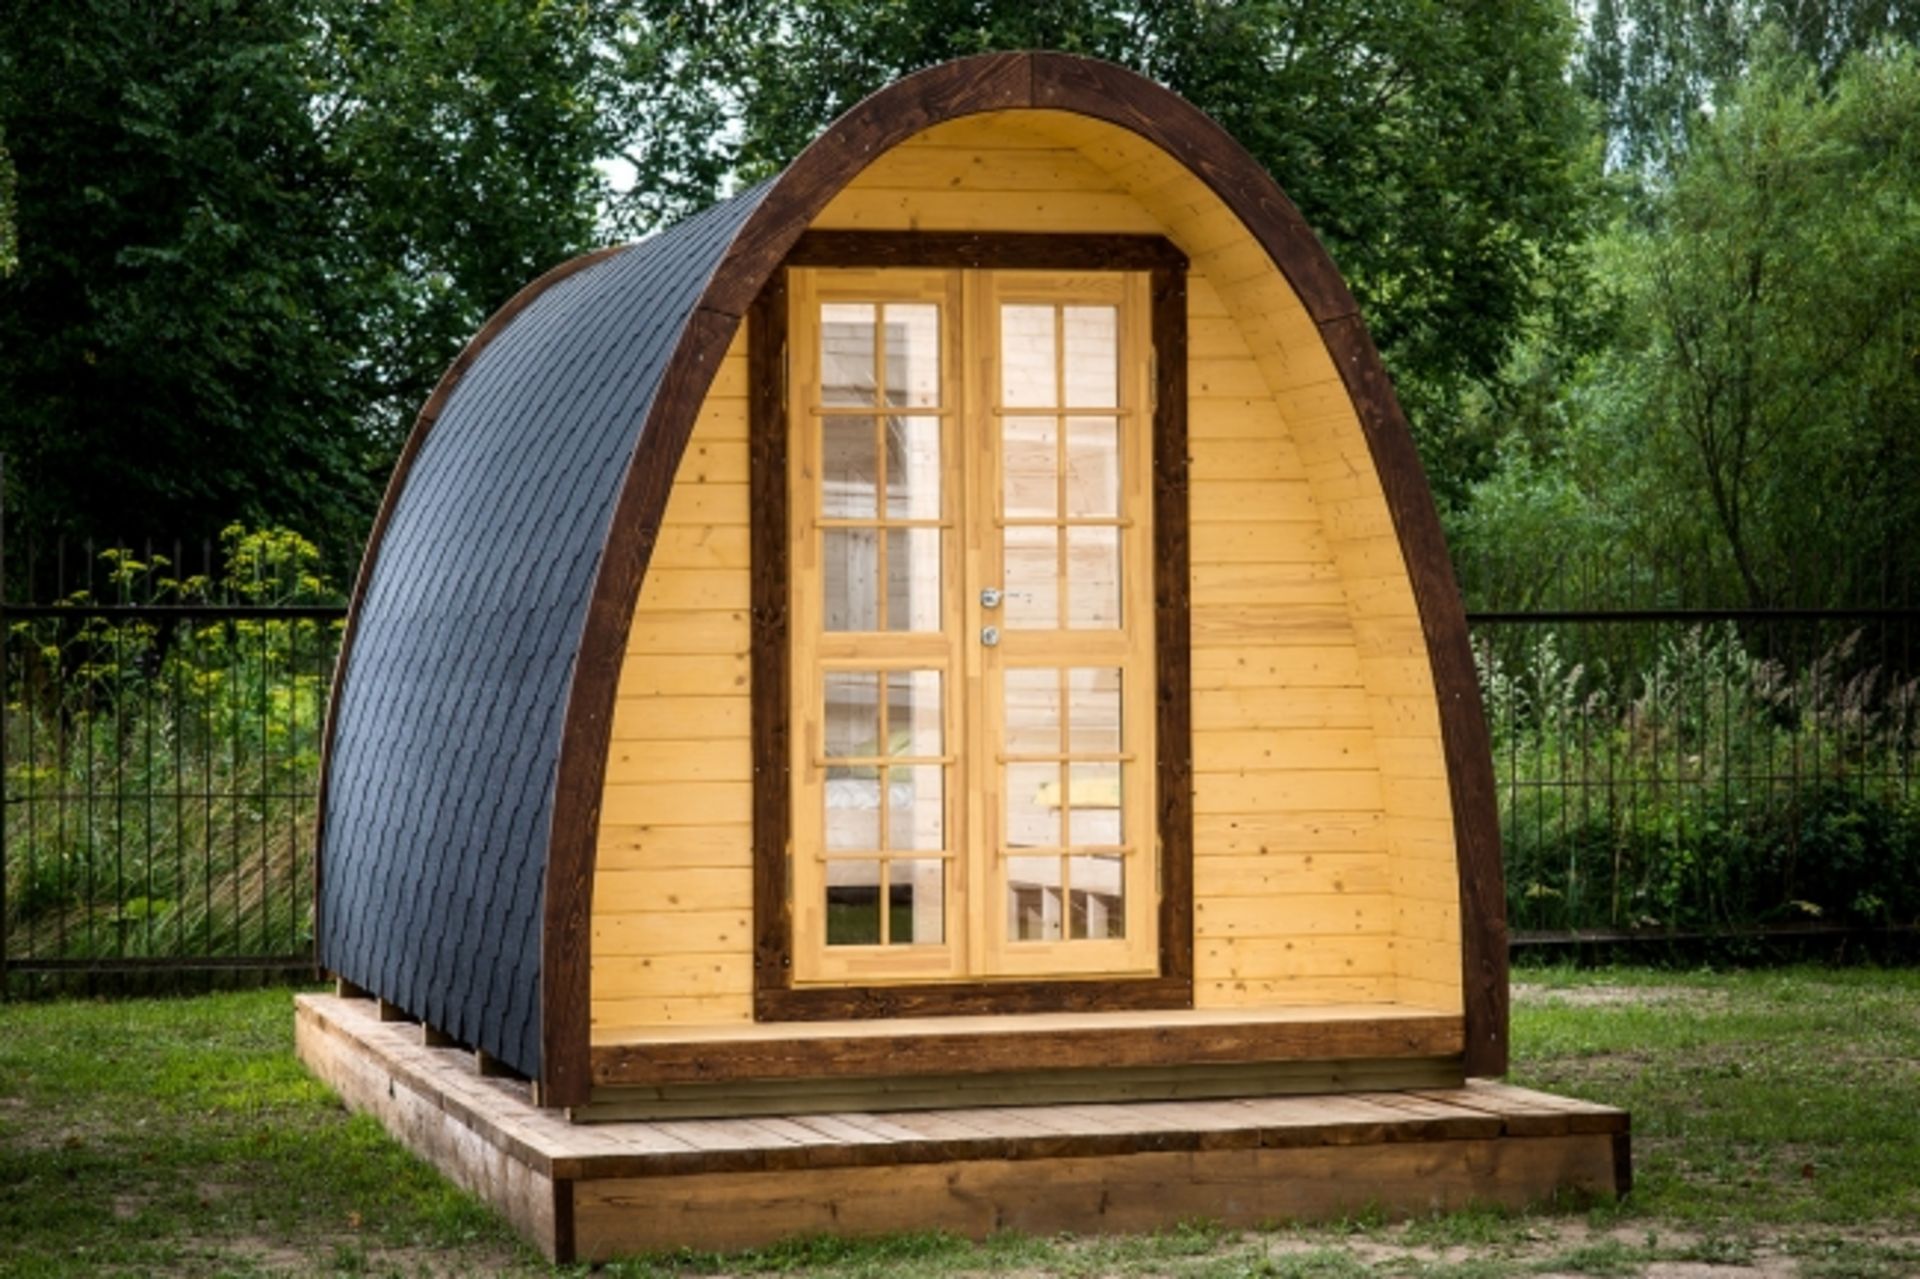 V Brand New 9.3m sq (2.4m x 4.8m) Spruce Camping Pod - Holds 2-4 People - Opening Window In The Back